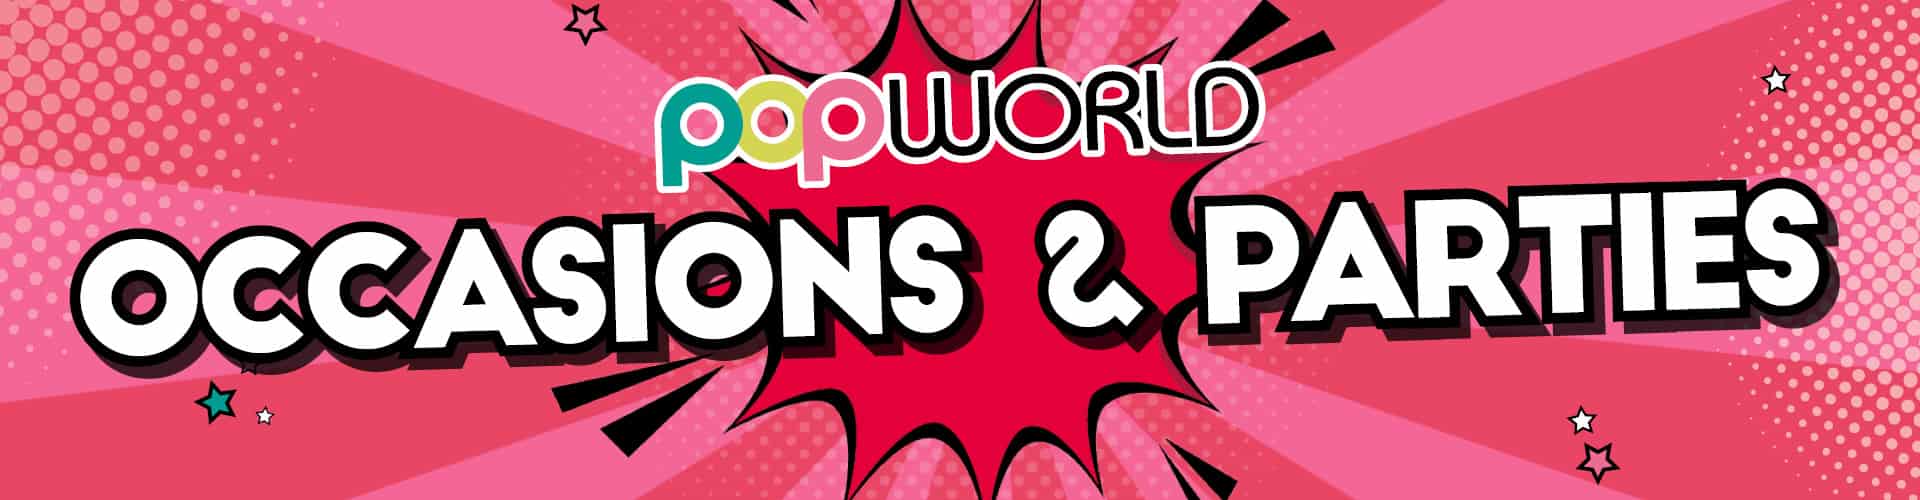 Occasions and Parties at Popworld Portsmouth